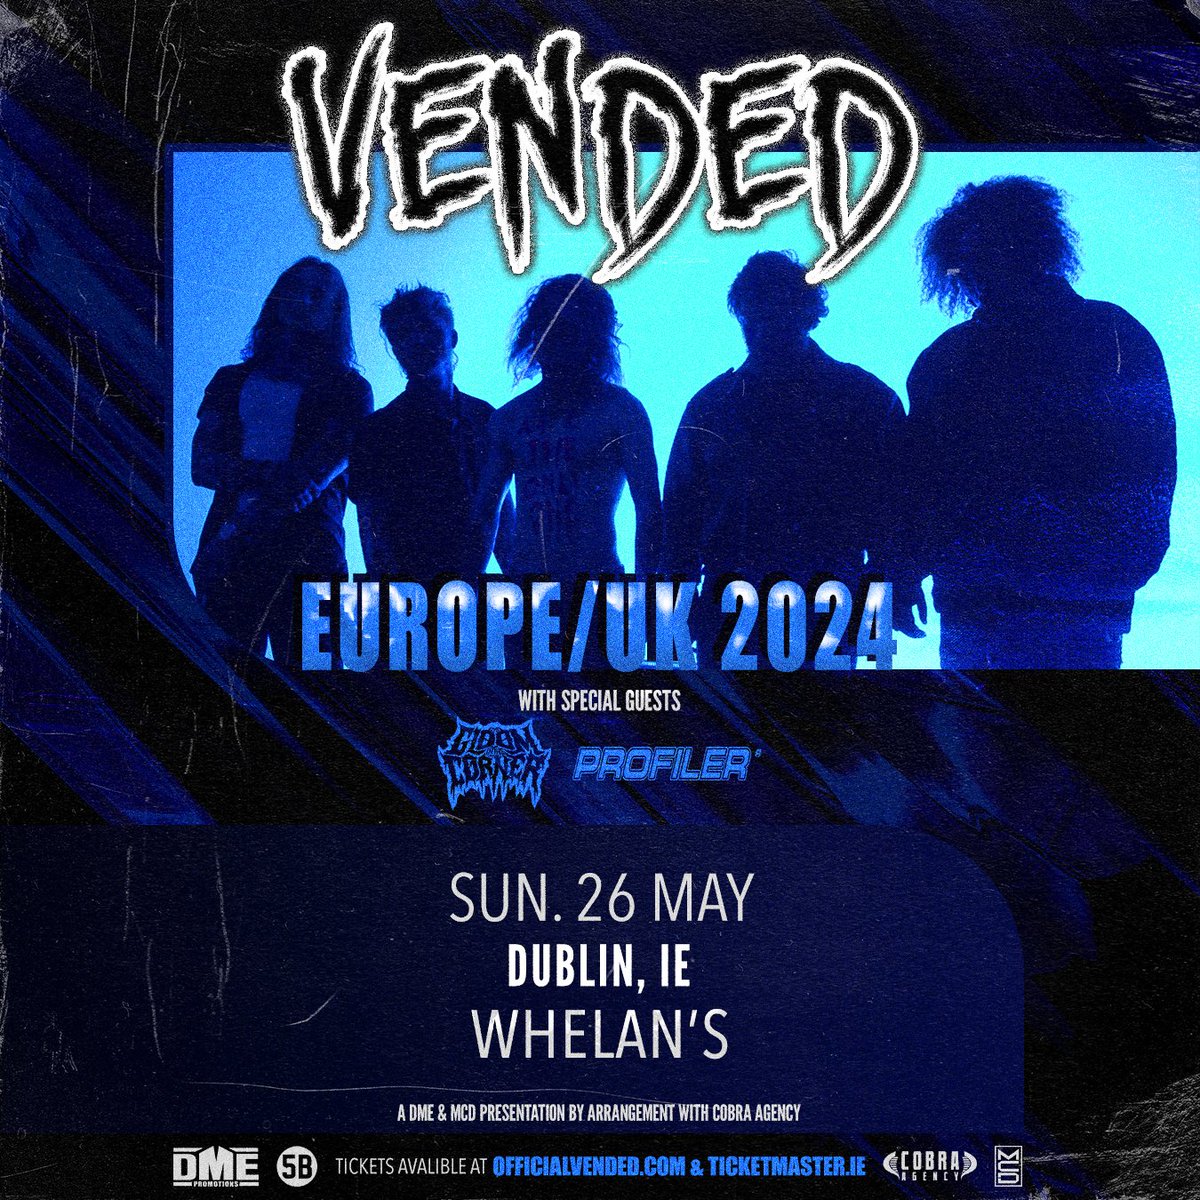 💀 3 WEEKS AWAY 💀 @OfficialVended hit Dublin with special guests @tgitcband & @profilerband Limited tickets remain from Ticketmaster and venue site 🔥